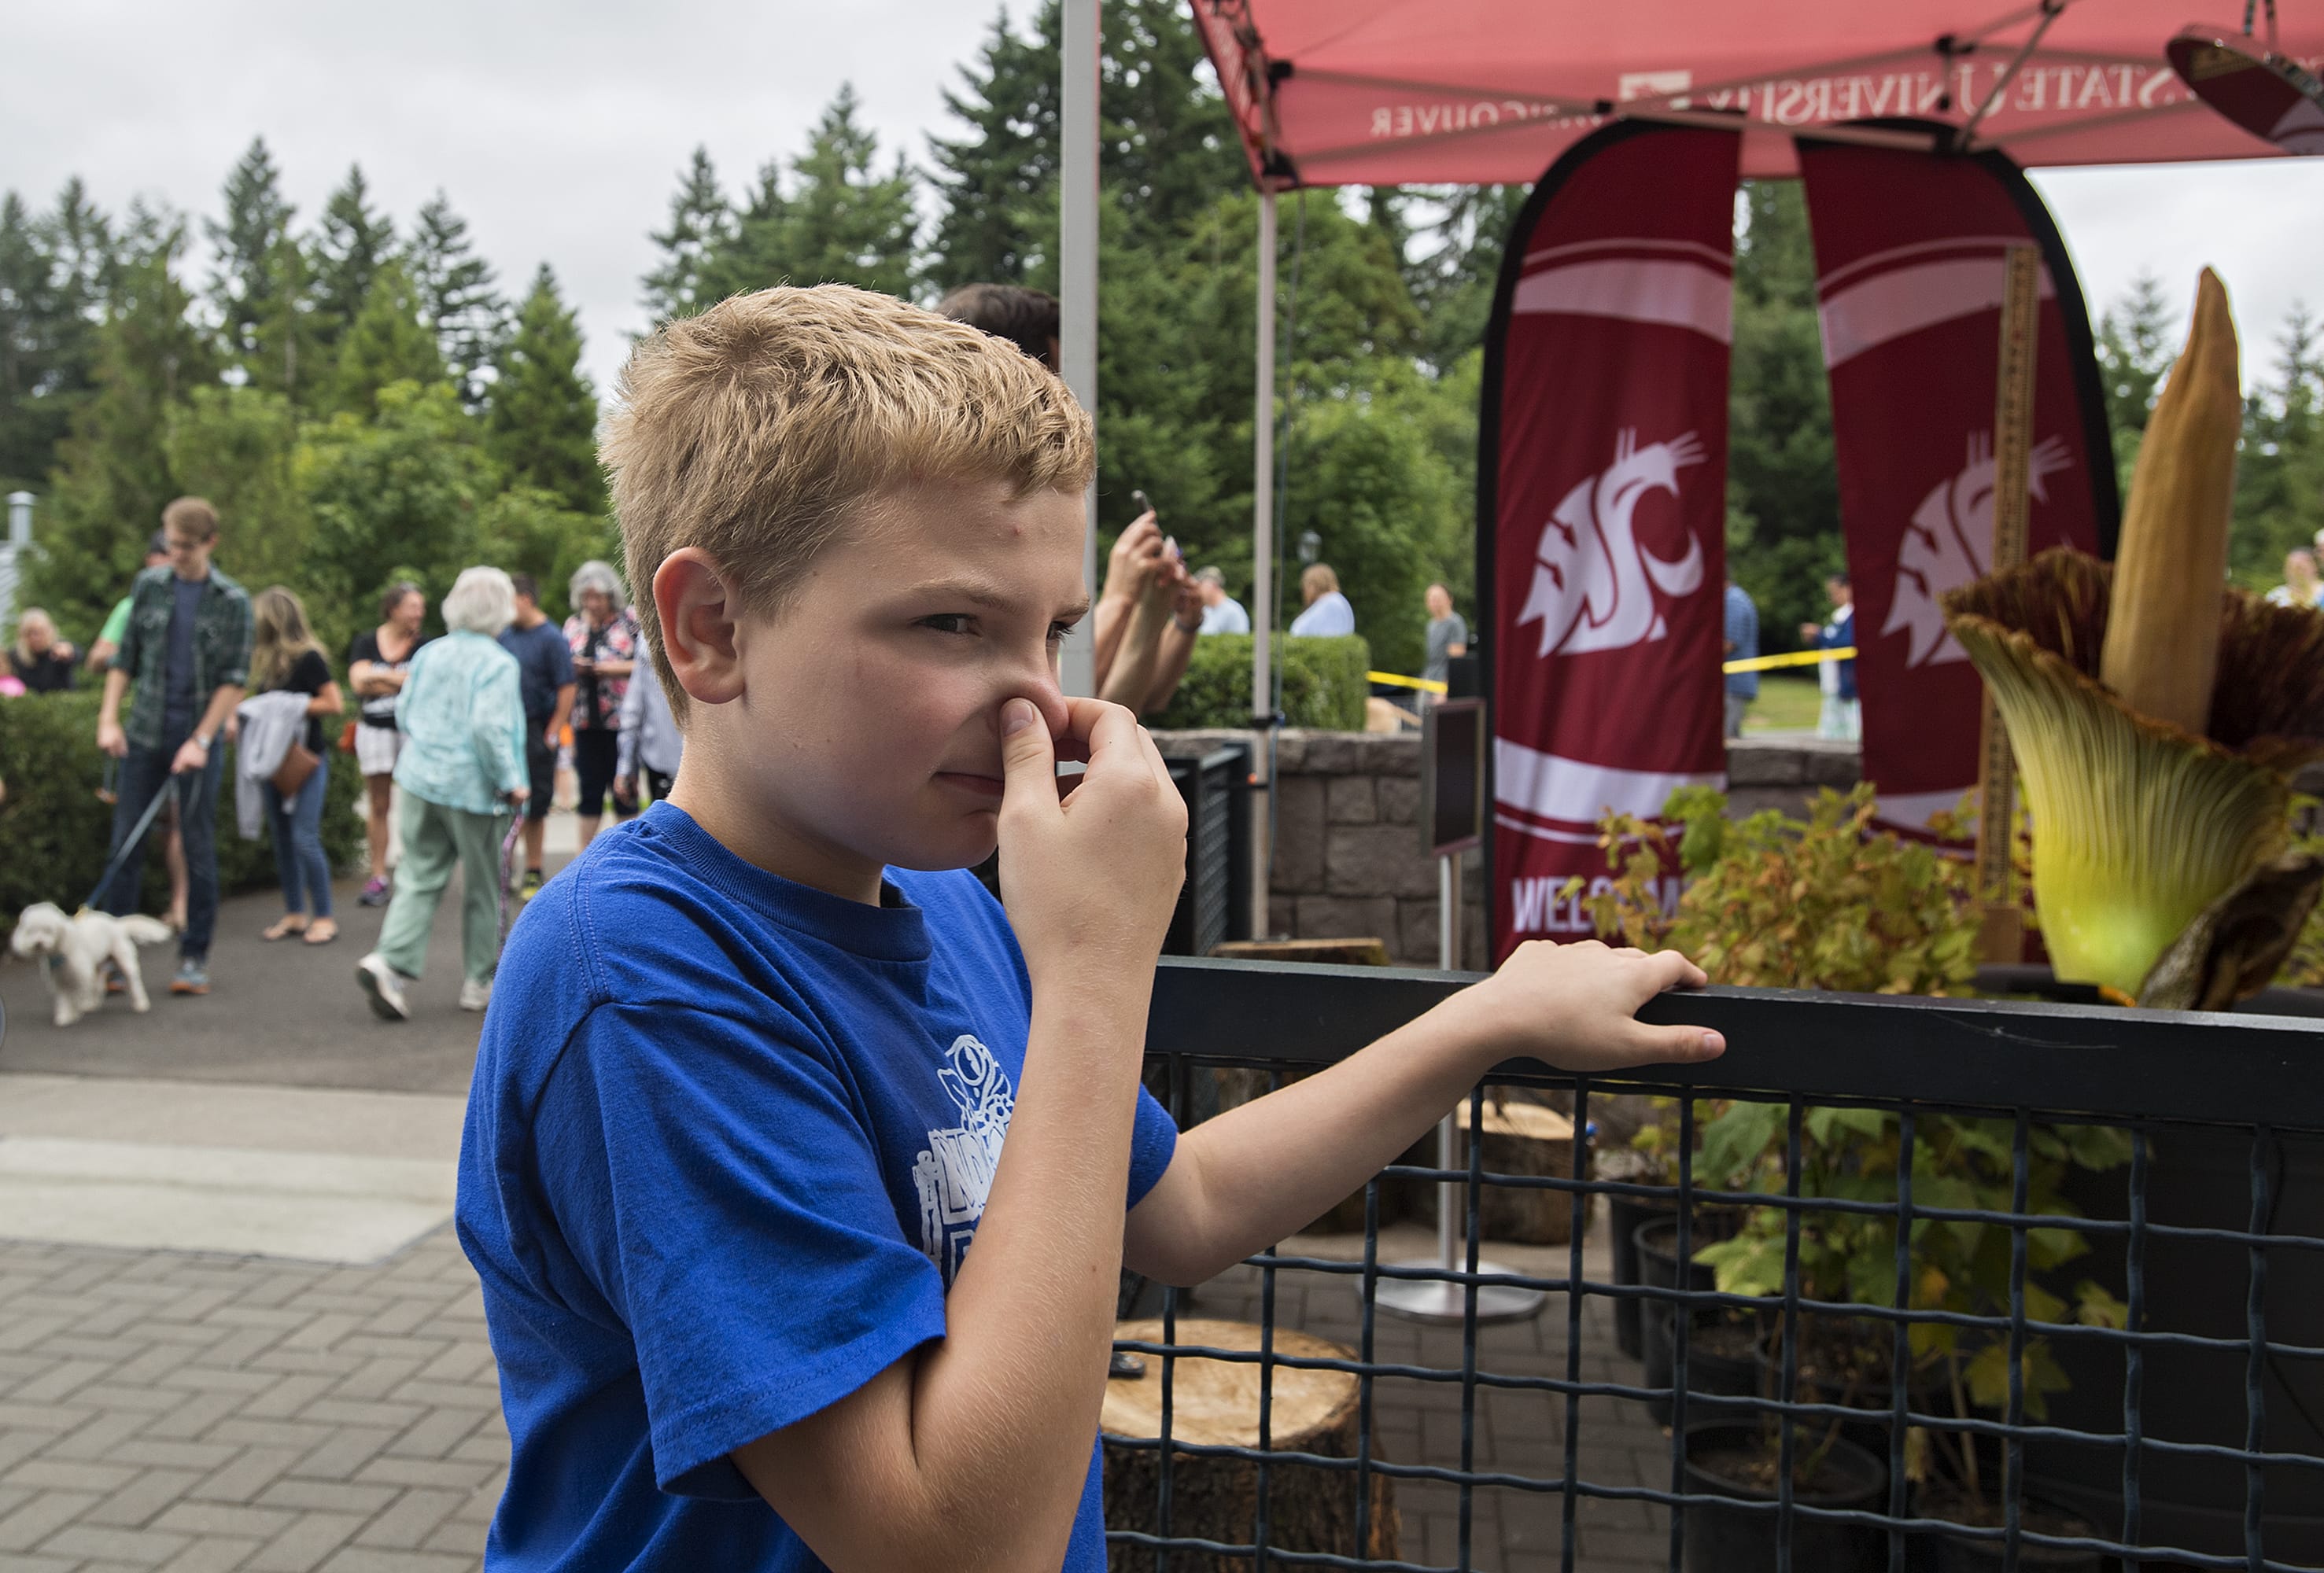 Joshua Cornish, 10, of Vancouver reacts after smelling the rare corpse flower, Titan VanCoug, in bloom at Washington State University Vancouver on Tuesday morning, July 16, 2019. Cornish was one of hundreds of visitors that took in the sight and the smell of the unique flower. "It smelled like garbage," he said.